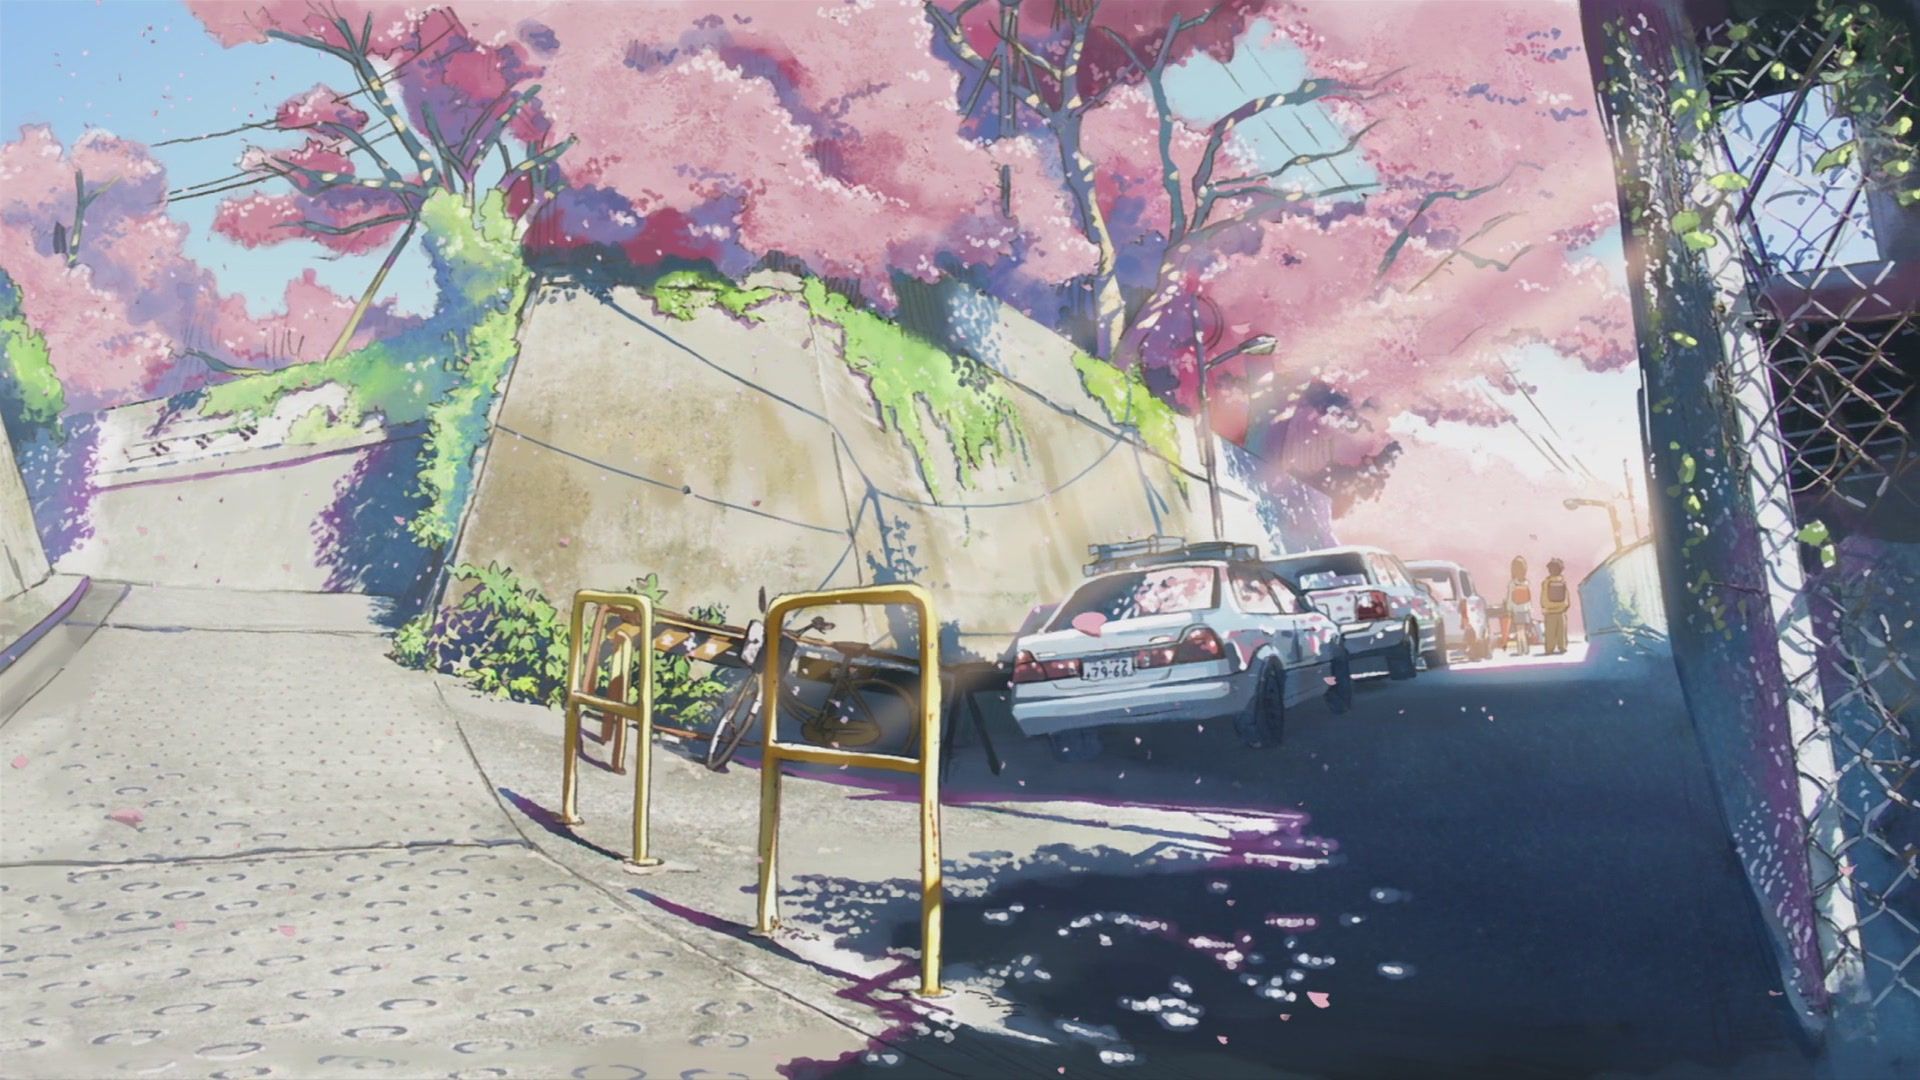 79 5 Centimeters Per Second HD Wallpapers | Backgrounds ...